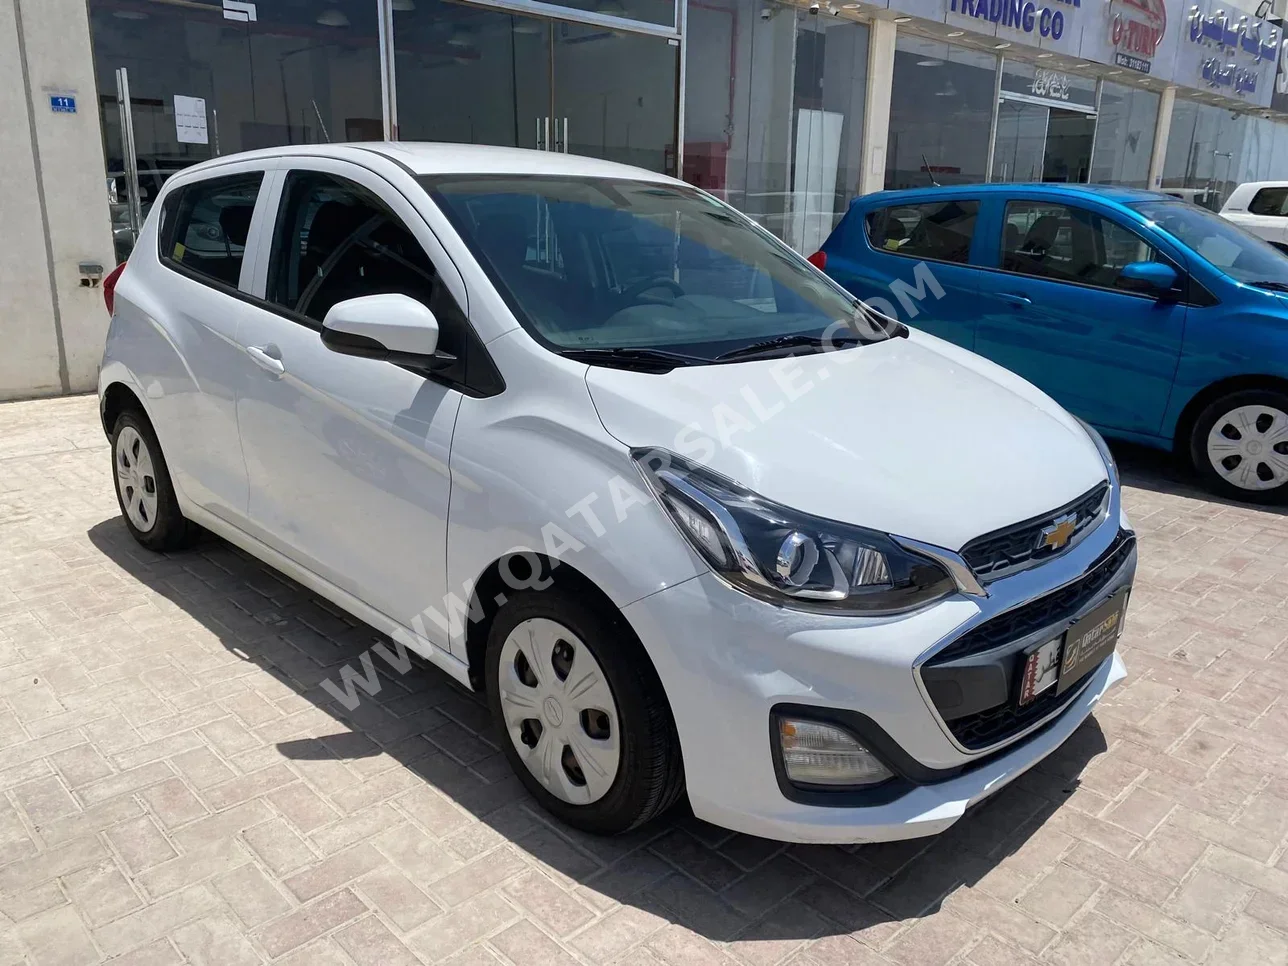 Chevrolet  Spark  2020  Automatic  74,000 Km  4 Cylinder  Front Wheel Drive (FWD)  Hatchback  White